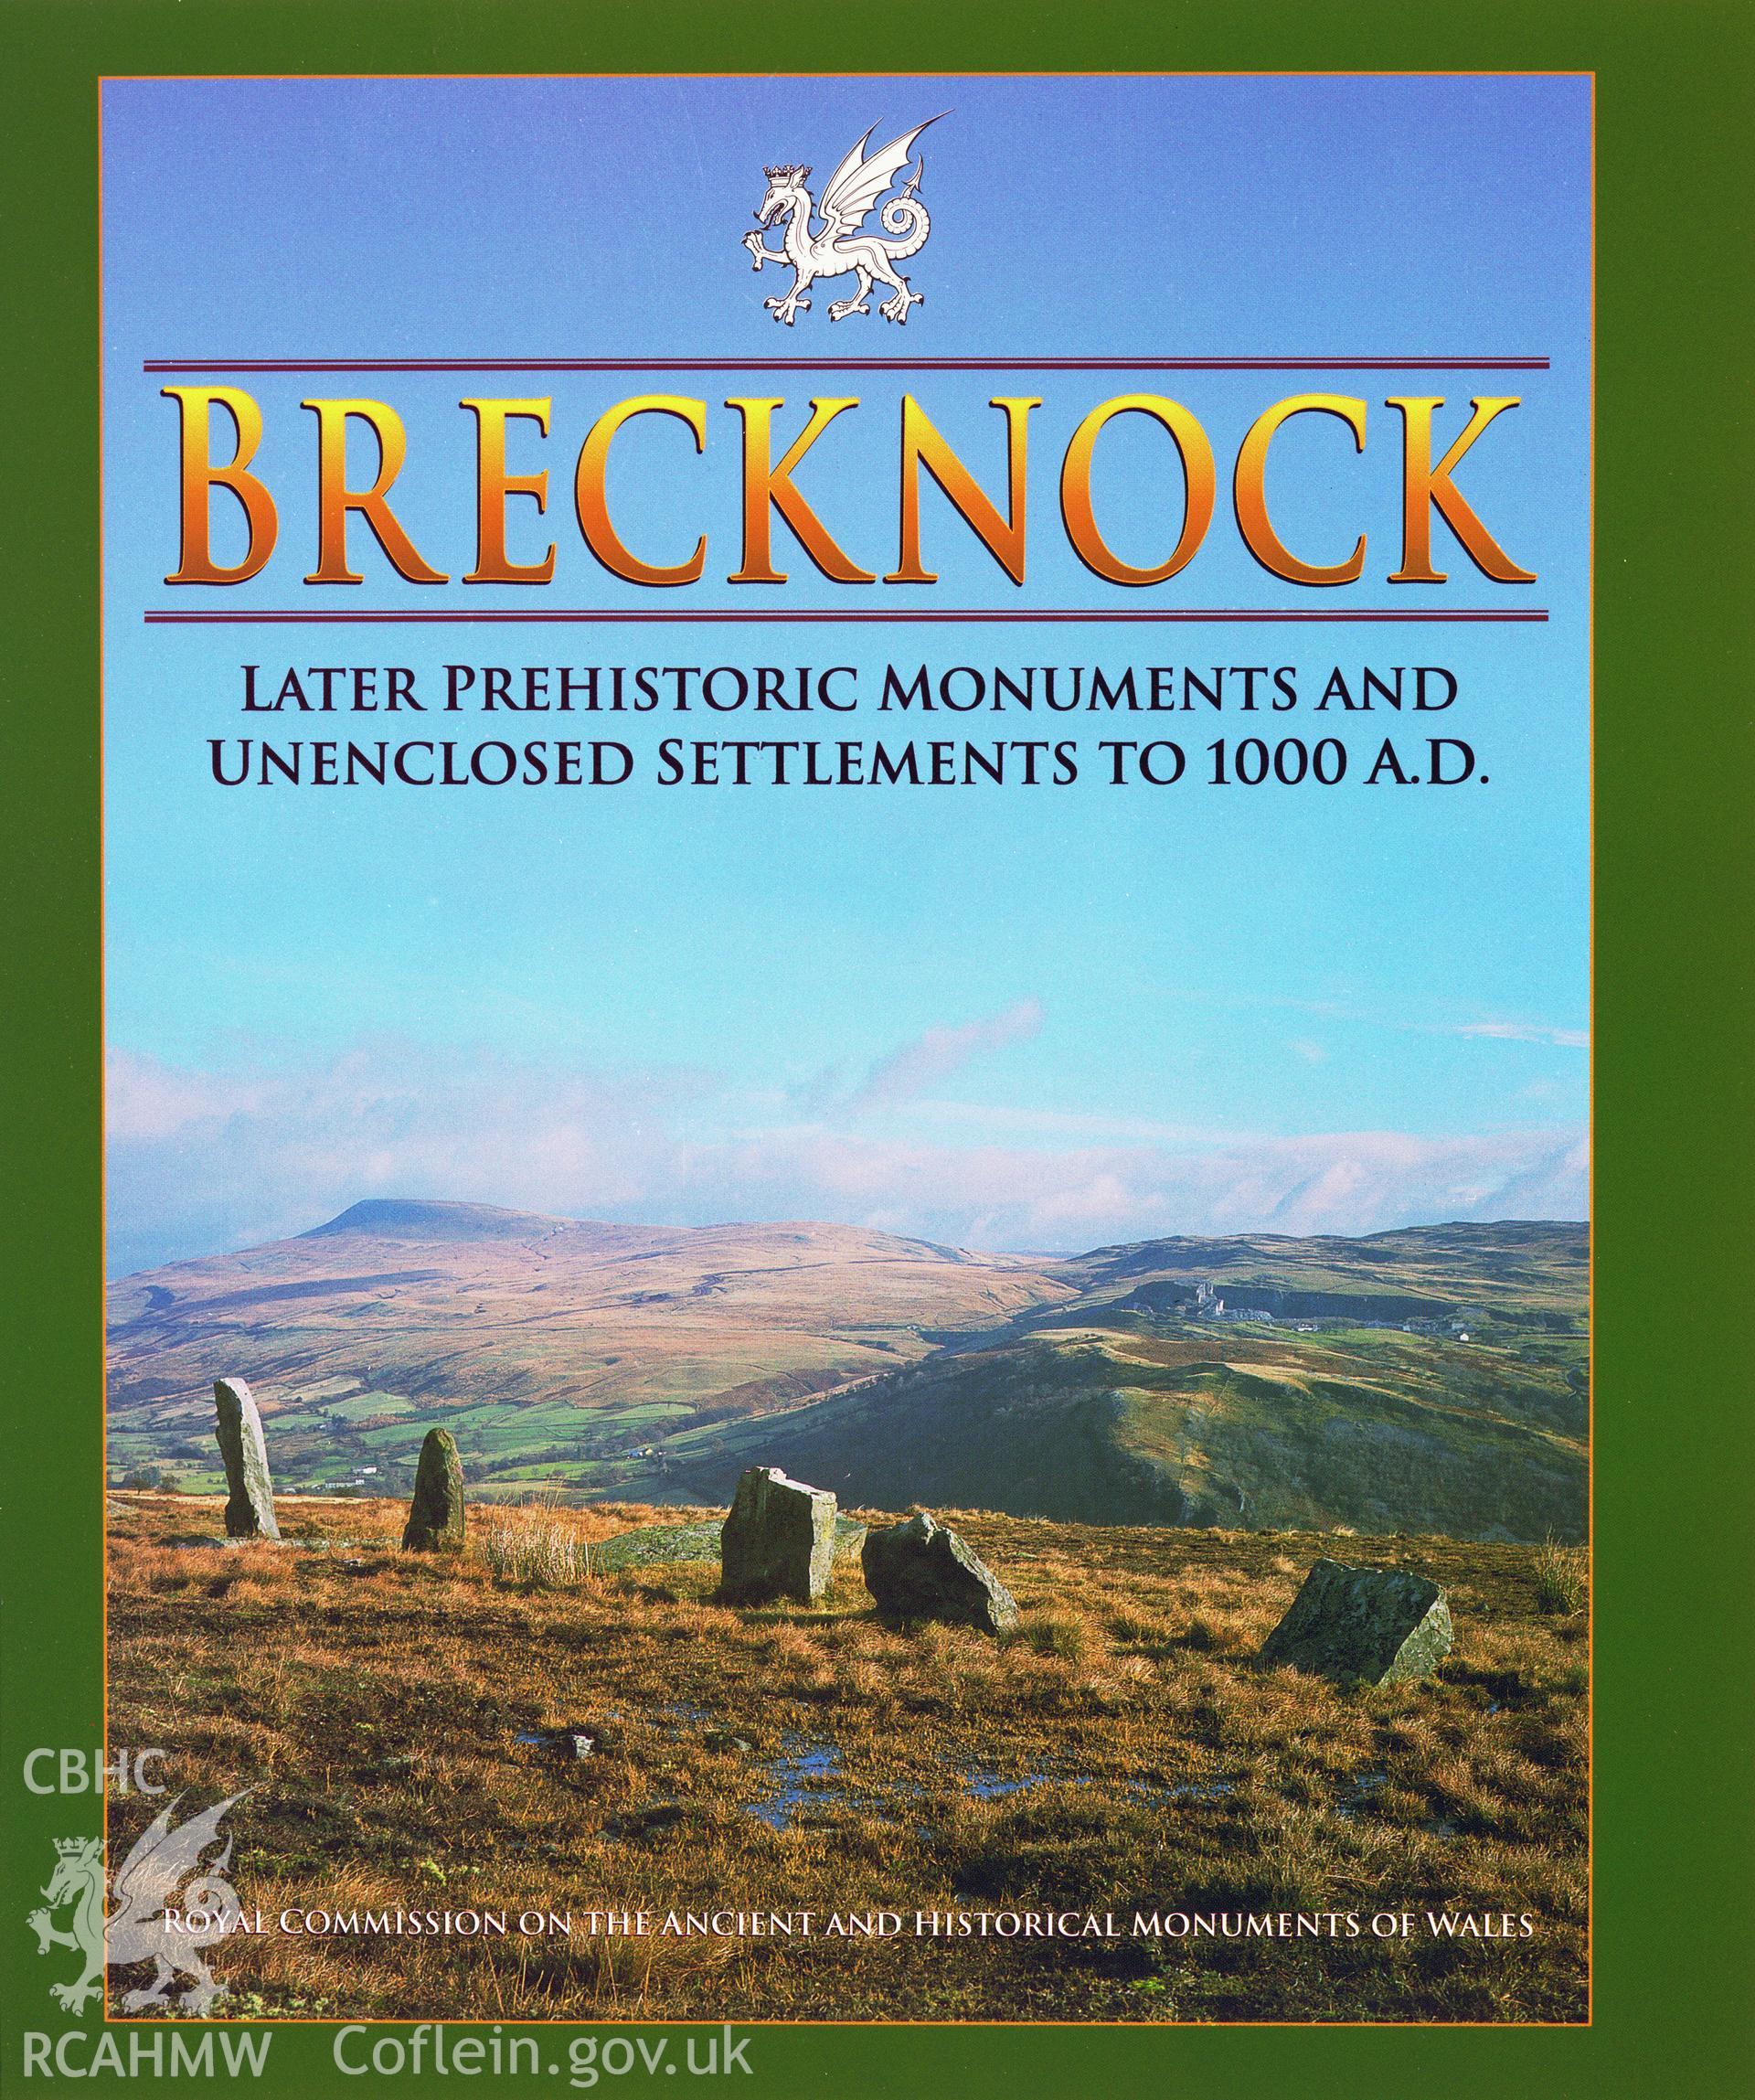 Colour transparency of the cover of the RCAHMW publication, Brecknock, Later Prehistoric Monuments and Enclosed Settlements to 1000 A.D.